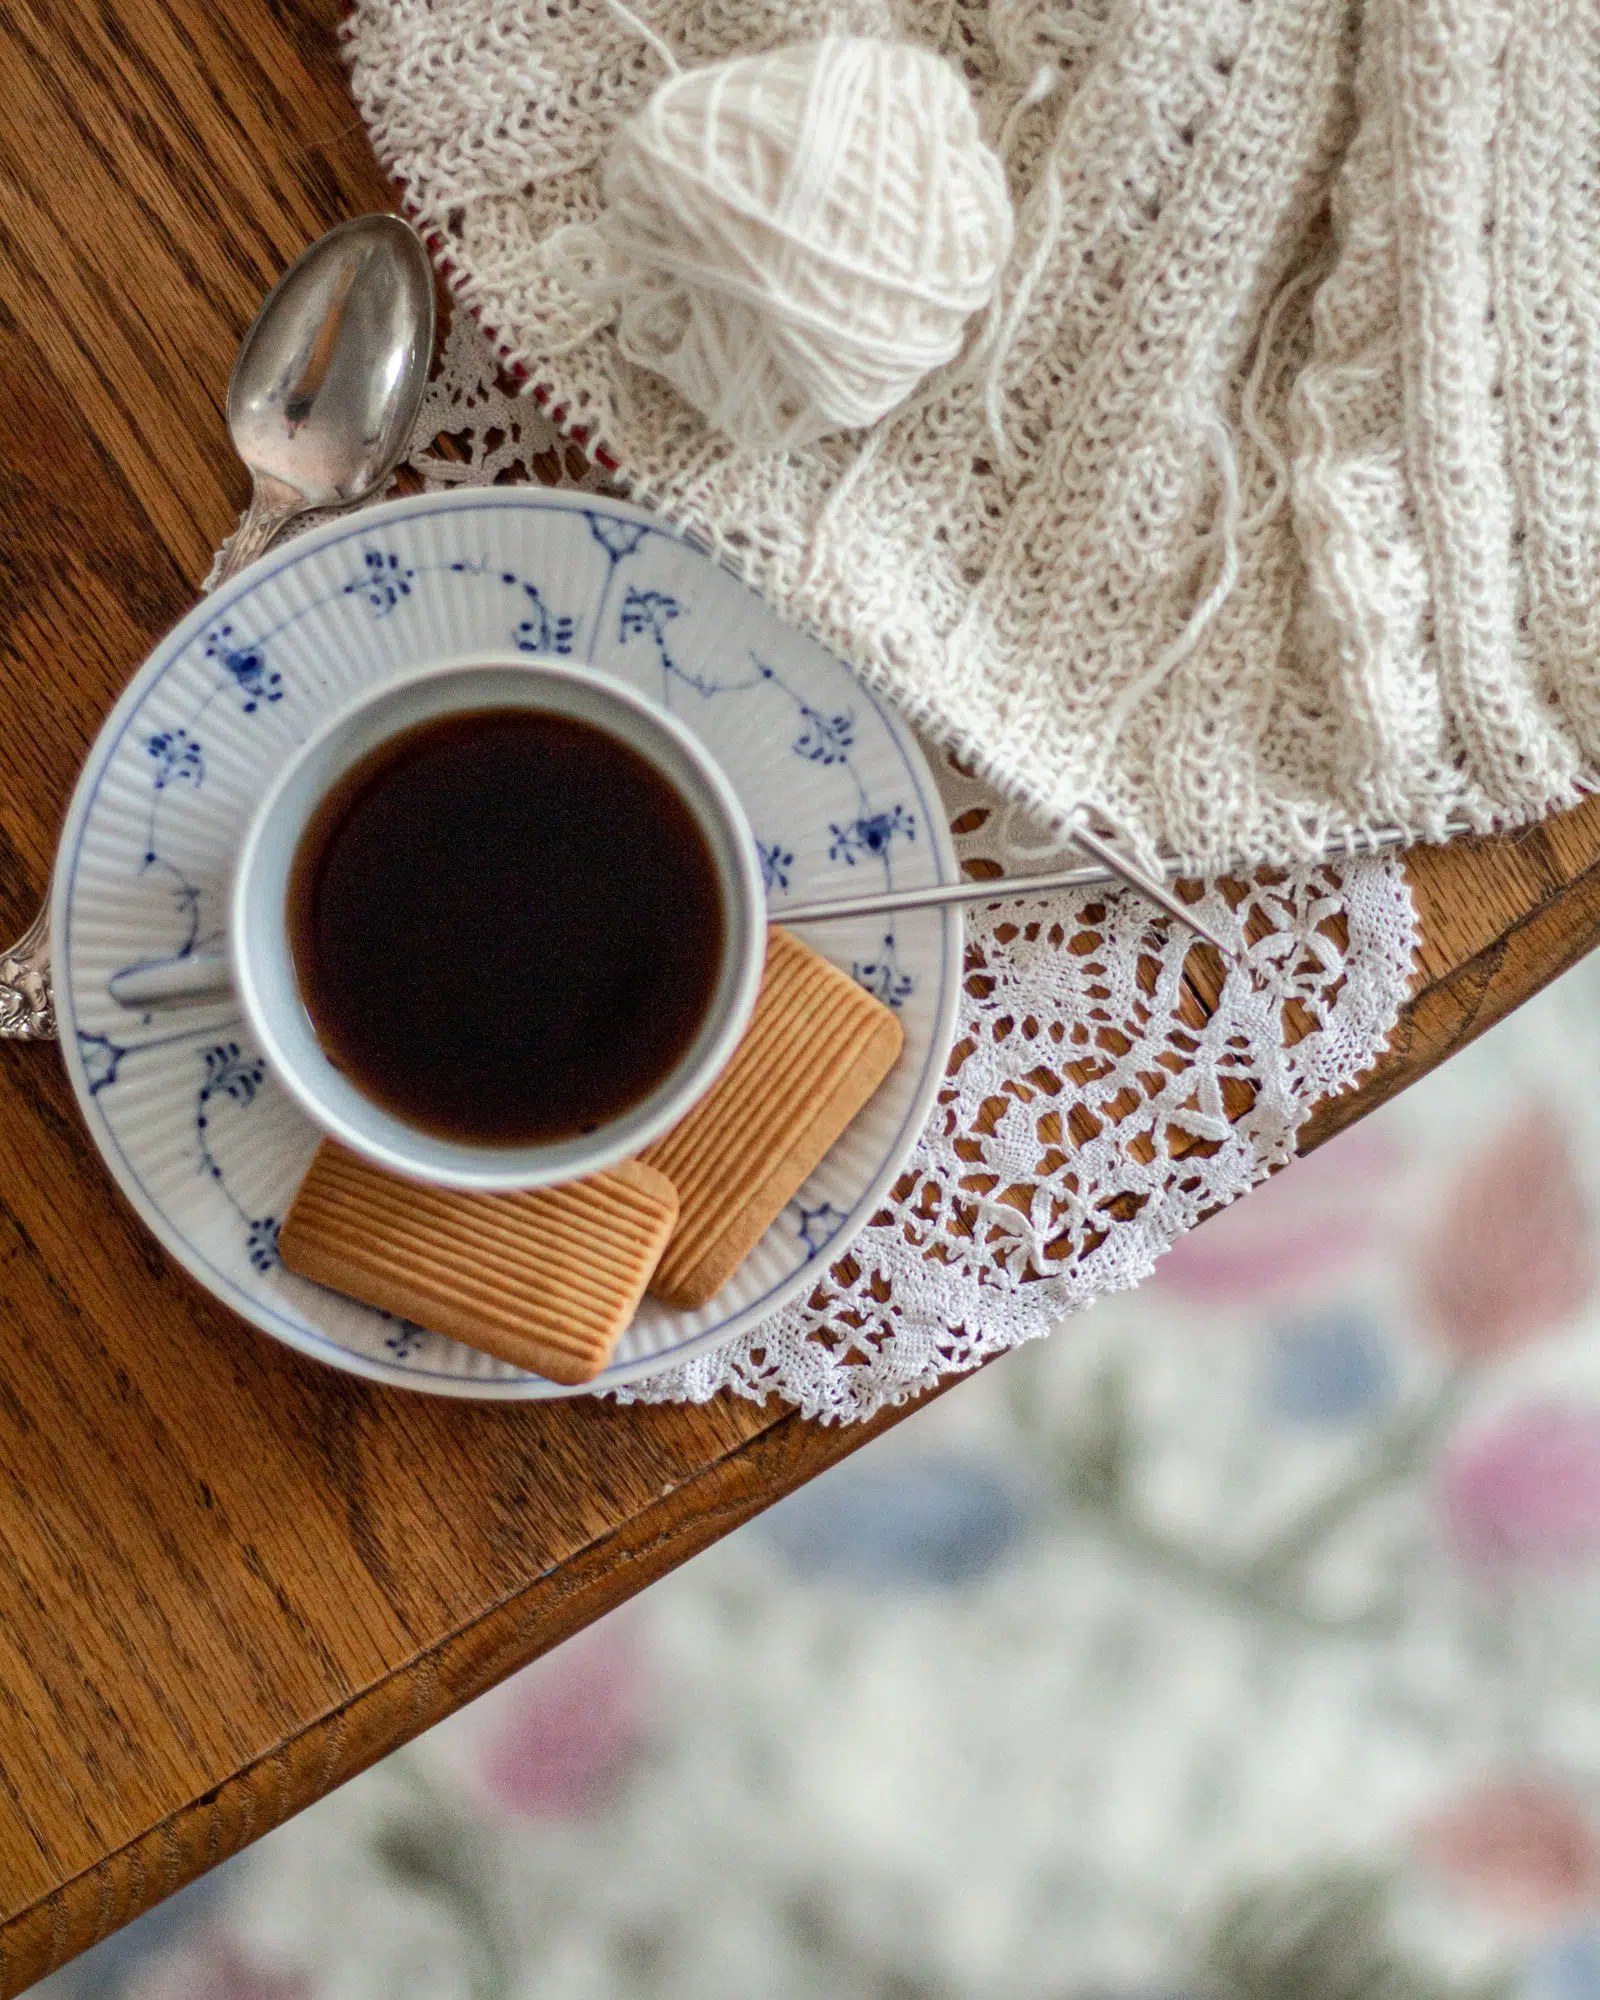 A top-down shot of a blue and white teacup and saucer sitting on the edge of an oak table with a white doily and some white knitting on steel needles. Knitting helps me overcome perfectionism by giving me a safe place to make mistakes.